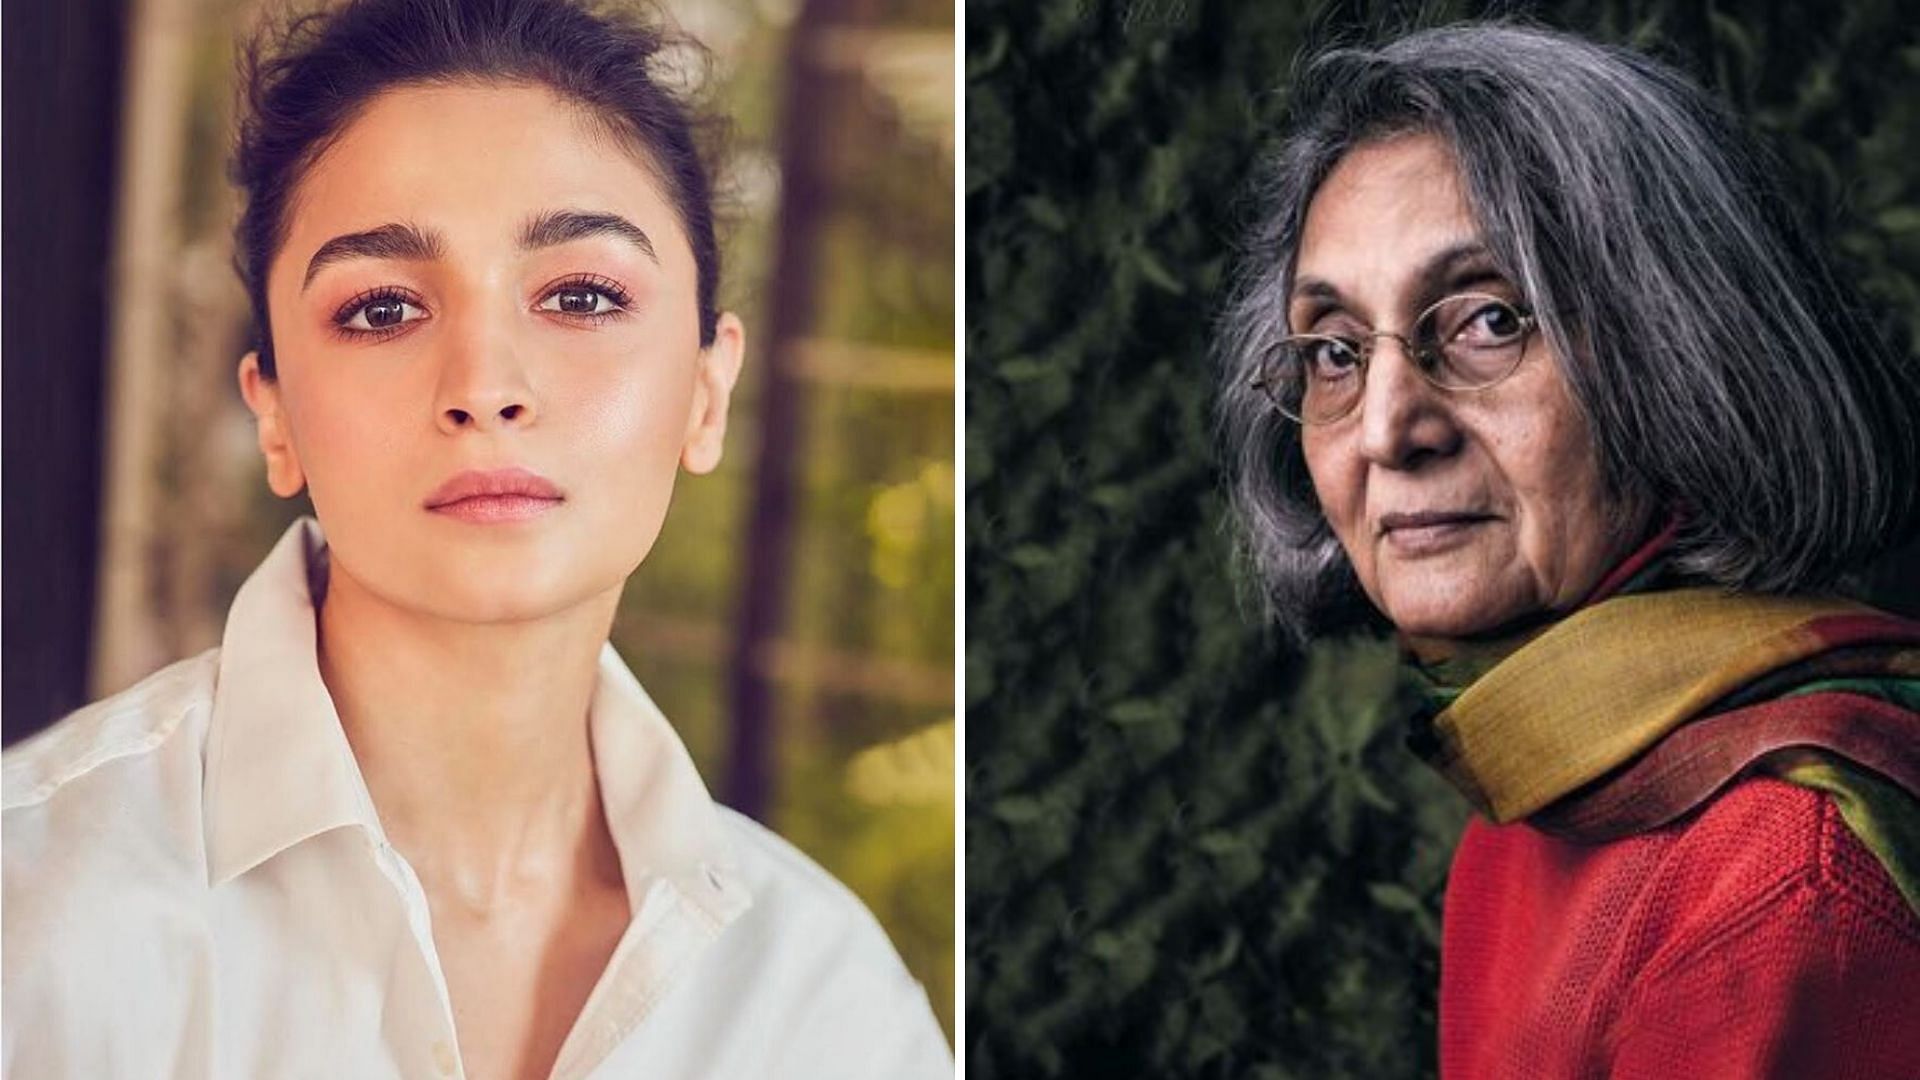 Alia Bhatt will essay the role of Ma Anand Sheela in her biopic.